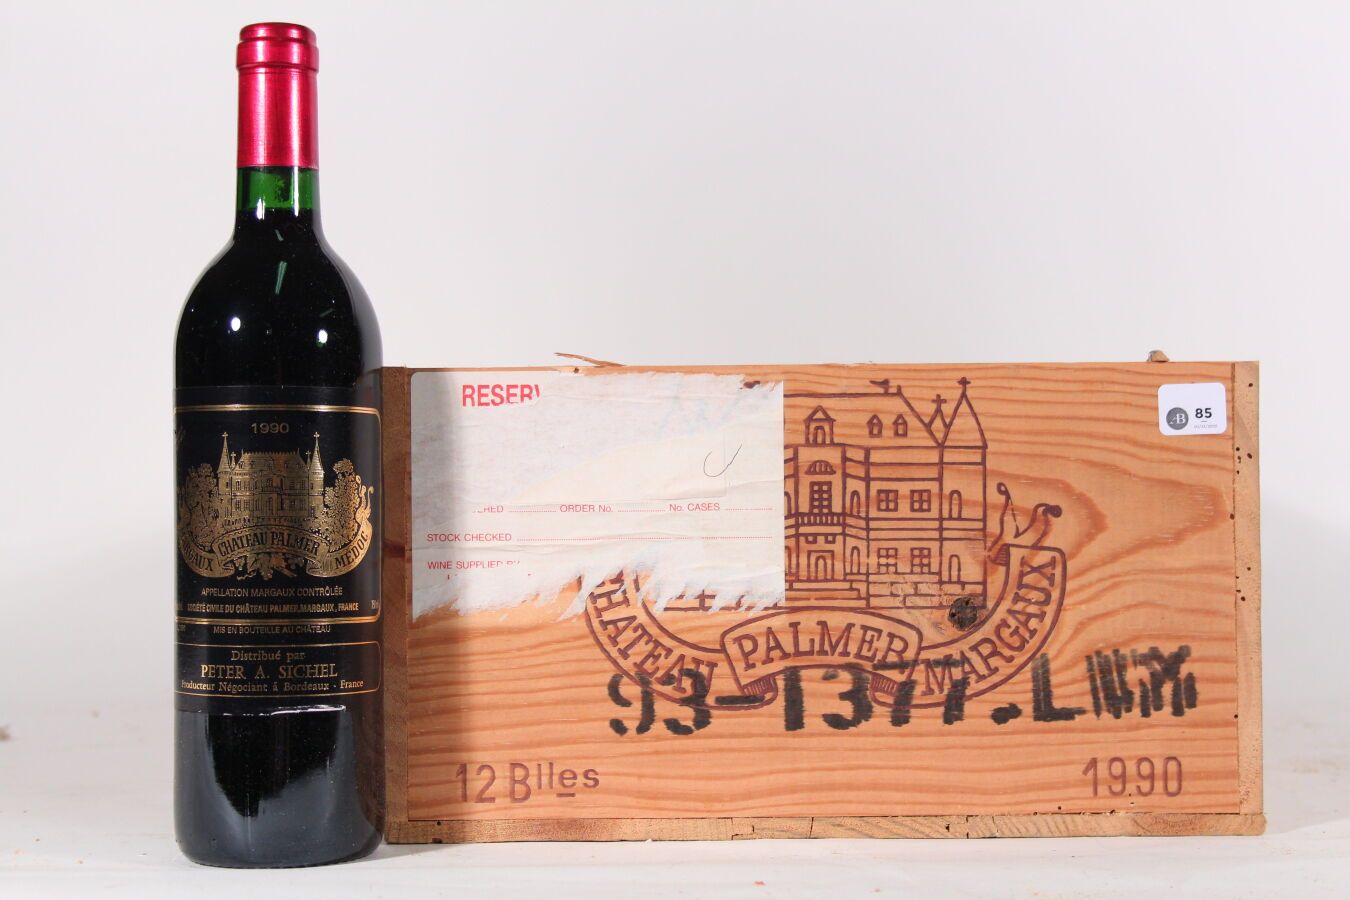 Null 1990 - Château Palmer
Margaux Red - 12 blles CBO